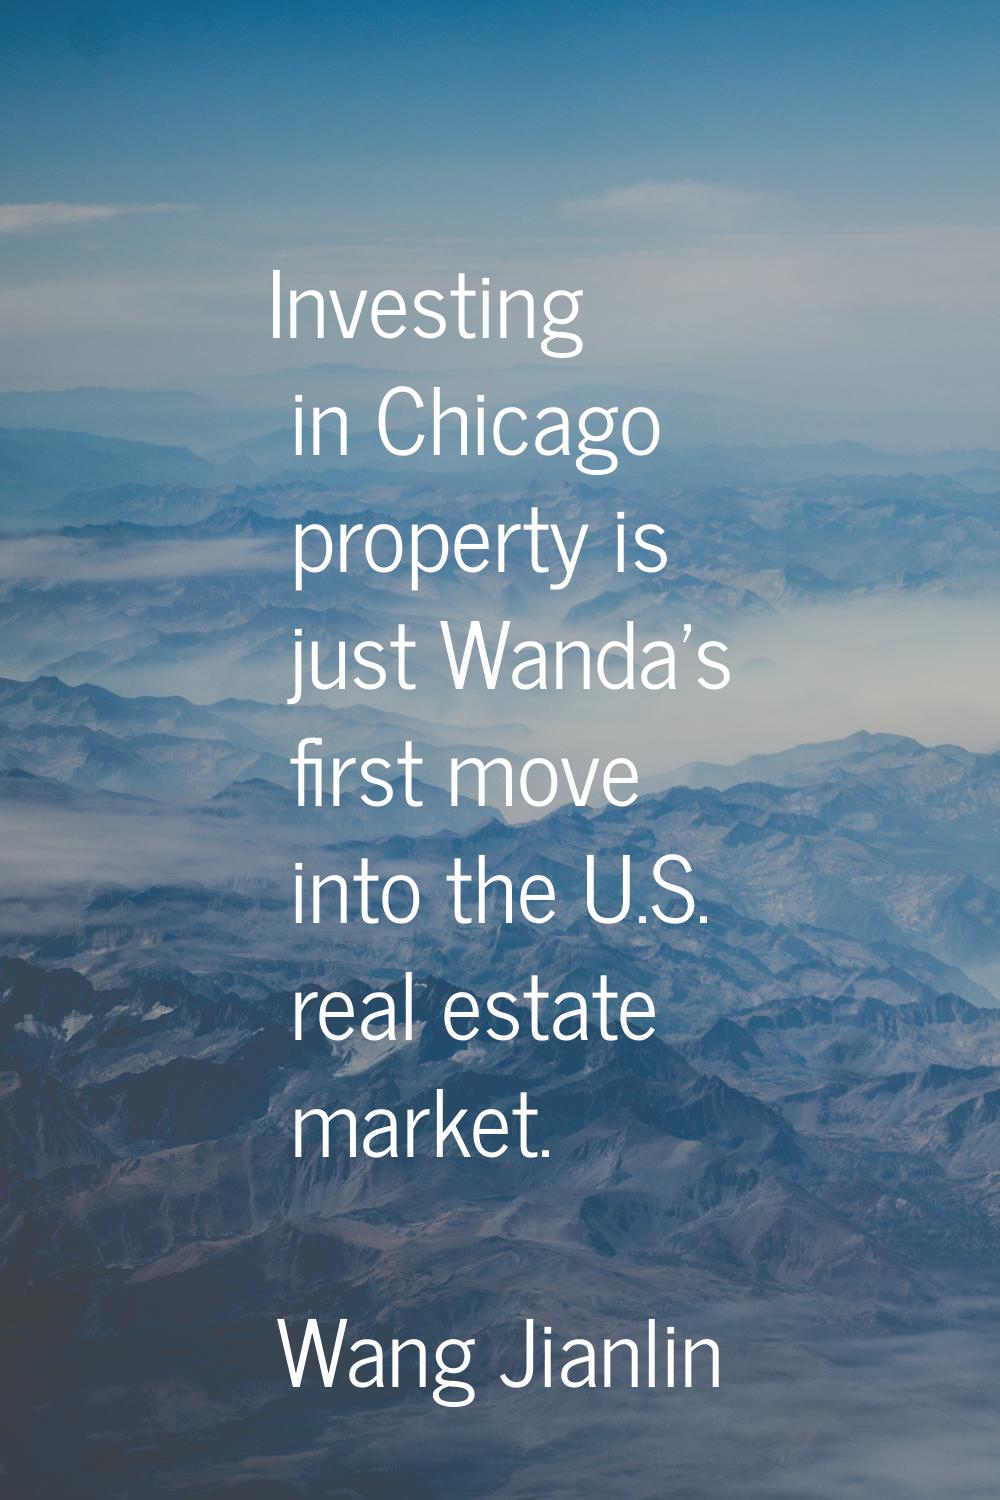 Investing in Chicago property is just Wanda's first move into the U.S. real estate market.